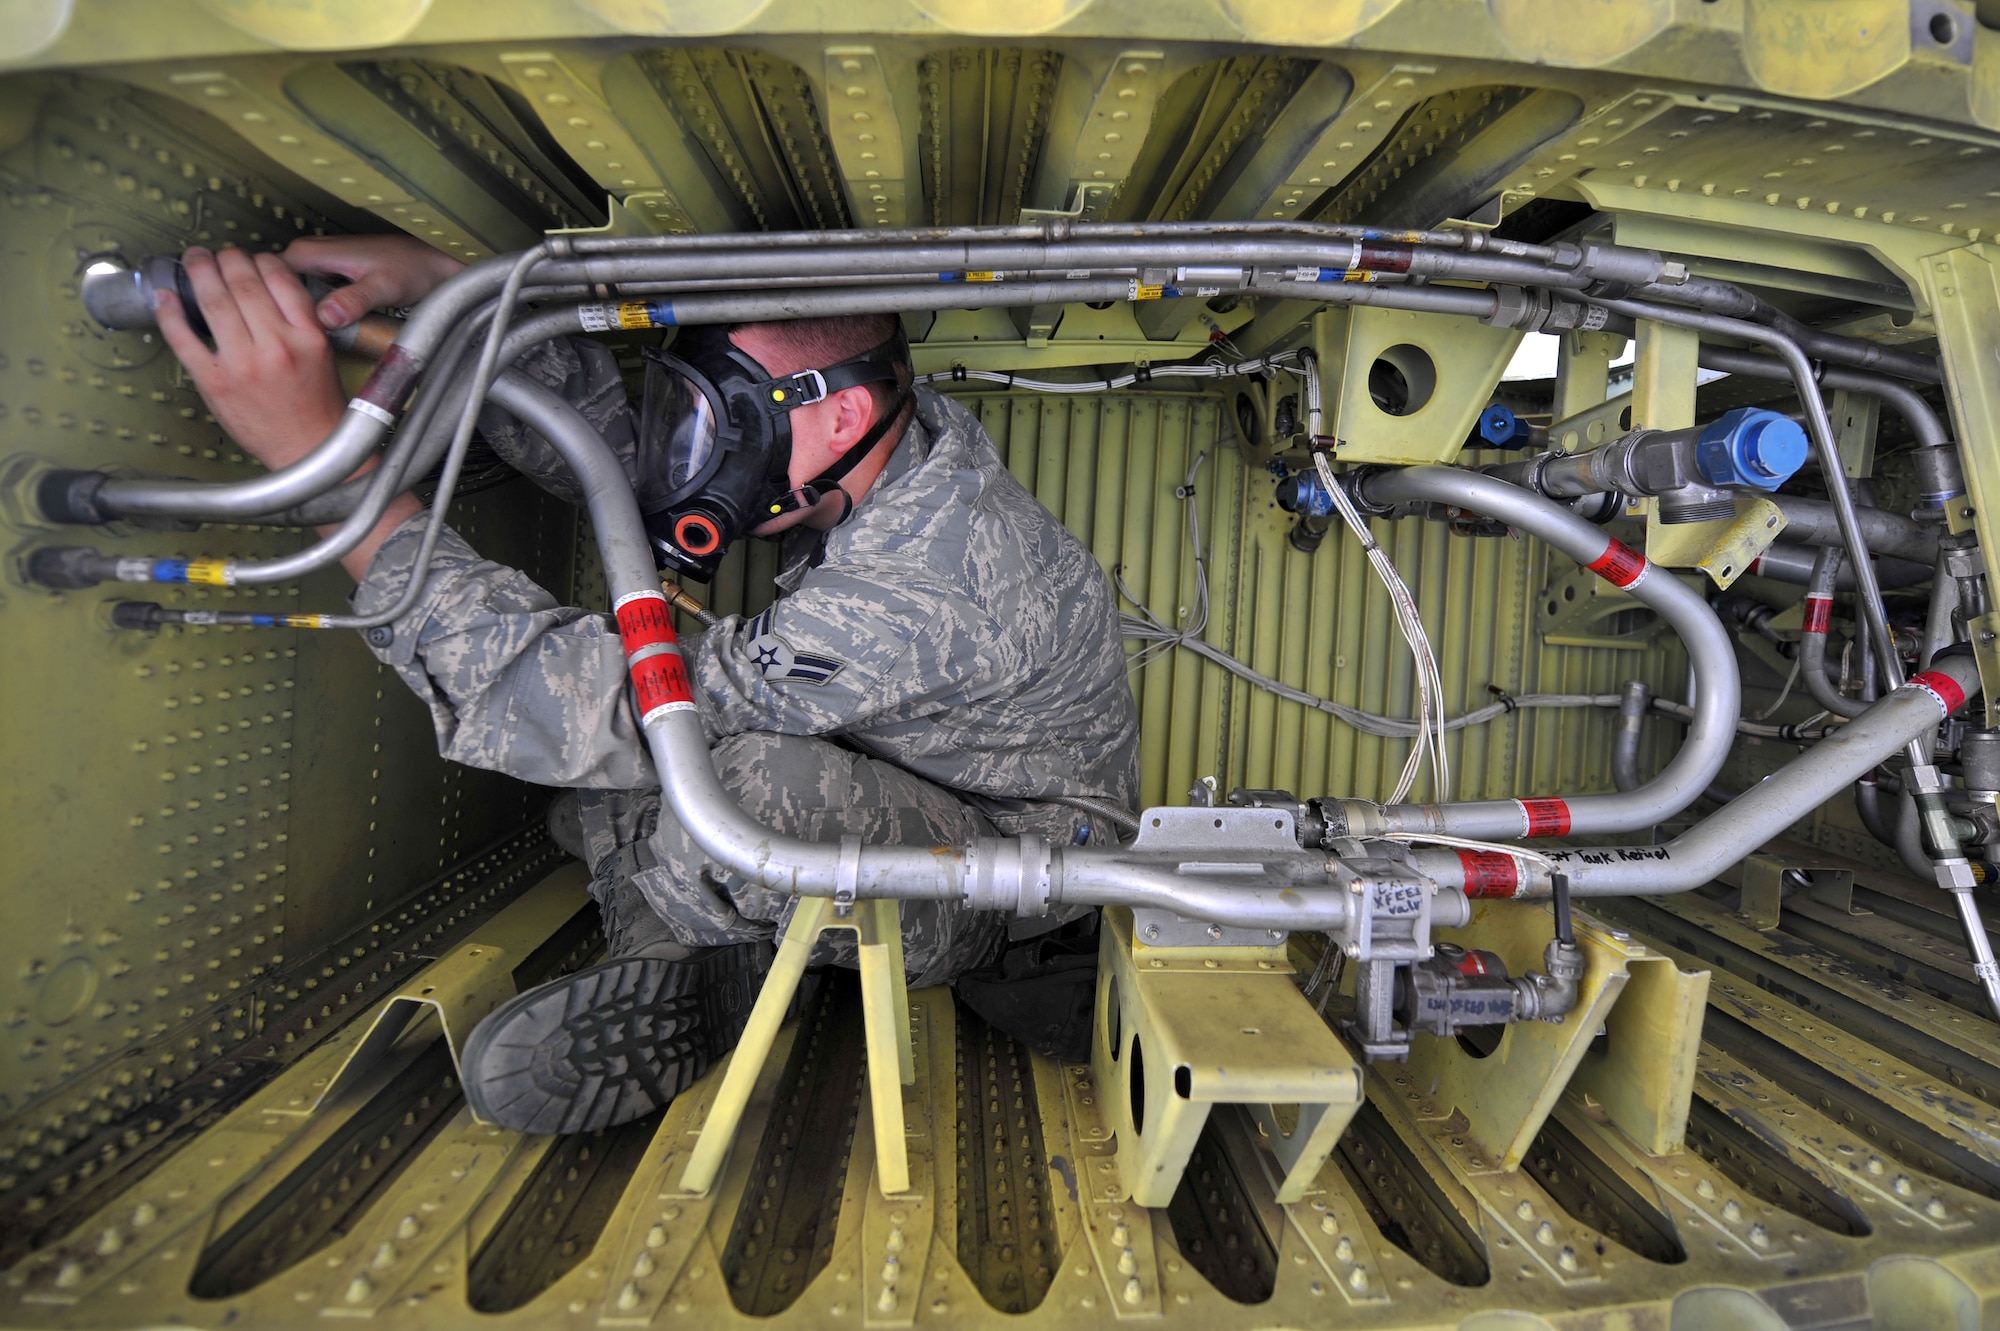 Airman 1st Class James Trainer, 19th Component Maintenance Squadron aircraft fuels systems repair apprentice, tightens a fuel pipe on a C-130 aircraft training wing July 16. The majority of an aircraft fuels systems repair Airman's duties take place in the wing of aircraft they maintain. (U.S. Air Force photo by Senior Airman Steele C. G. Britton)